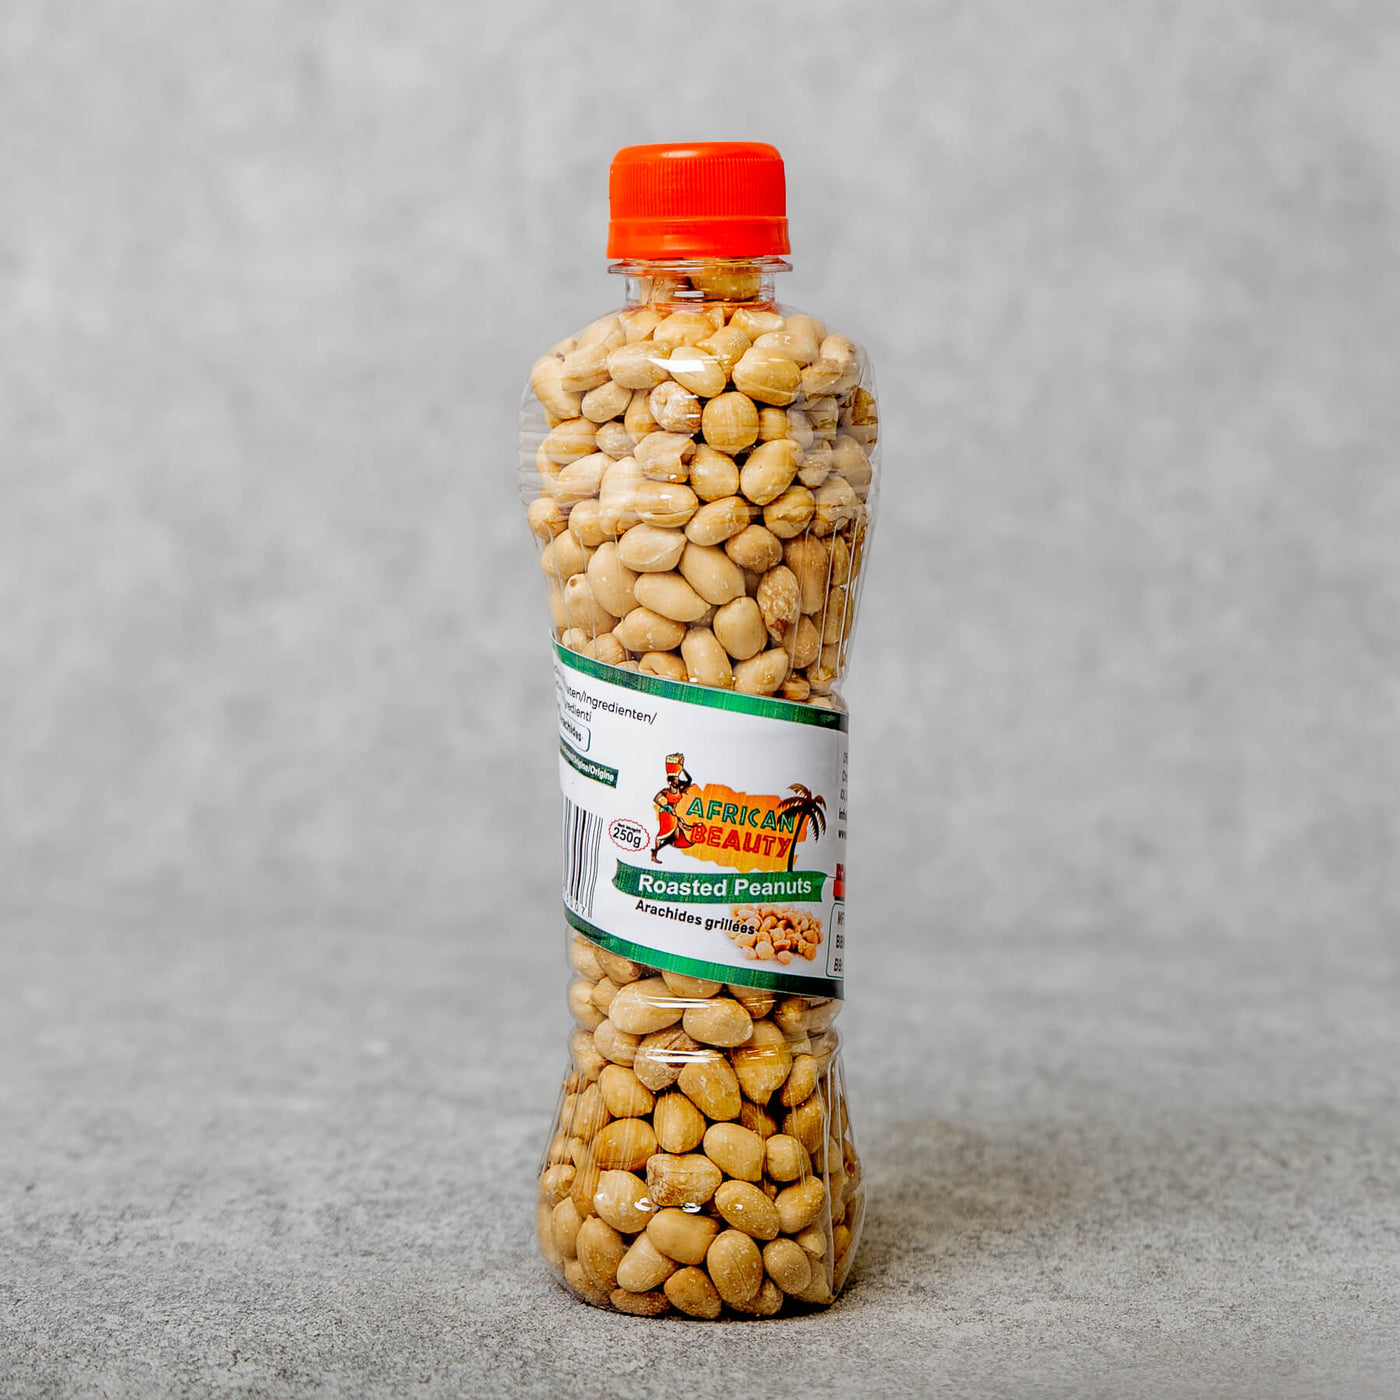 African Beauty - Roasted Peanuts